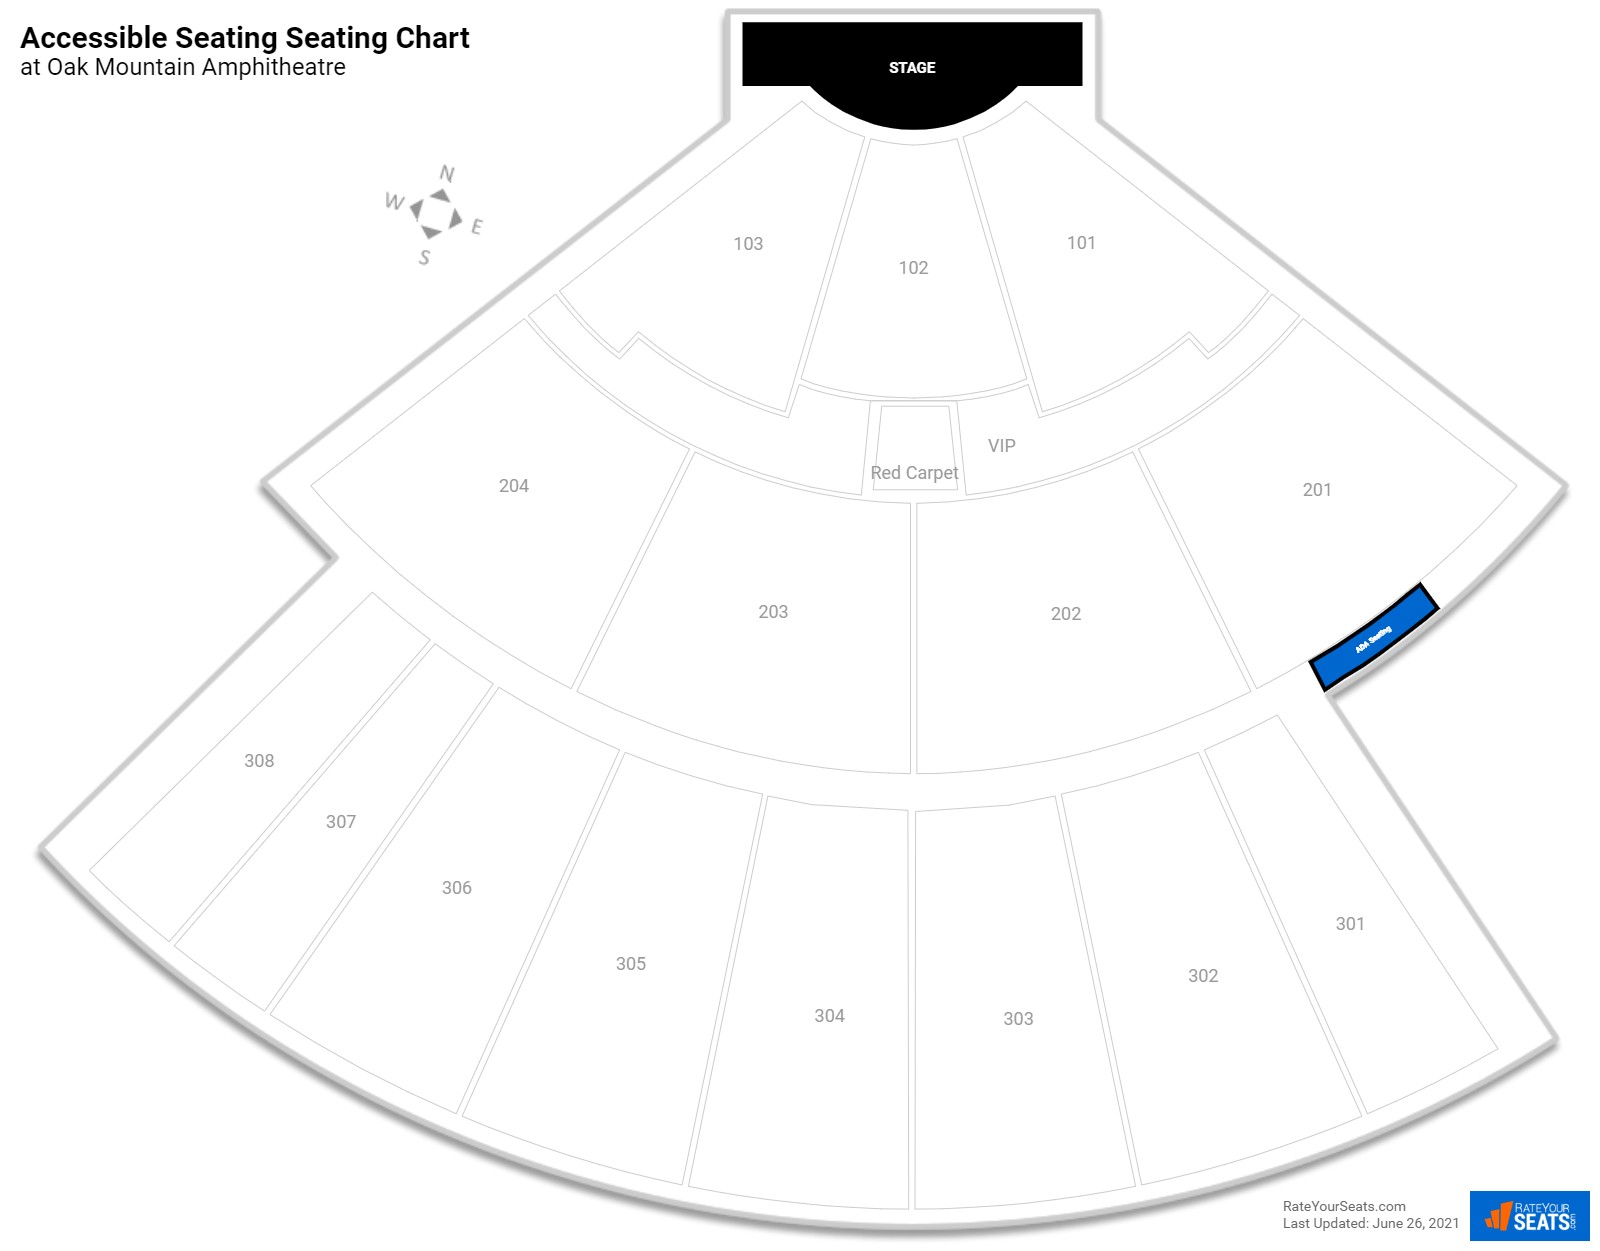 Concert Accessible Seating Seating Chart at Oak Mountain Amphitheatre